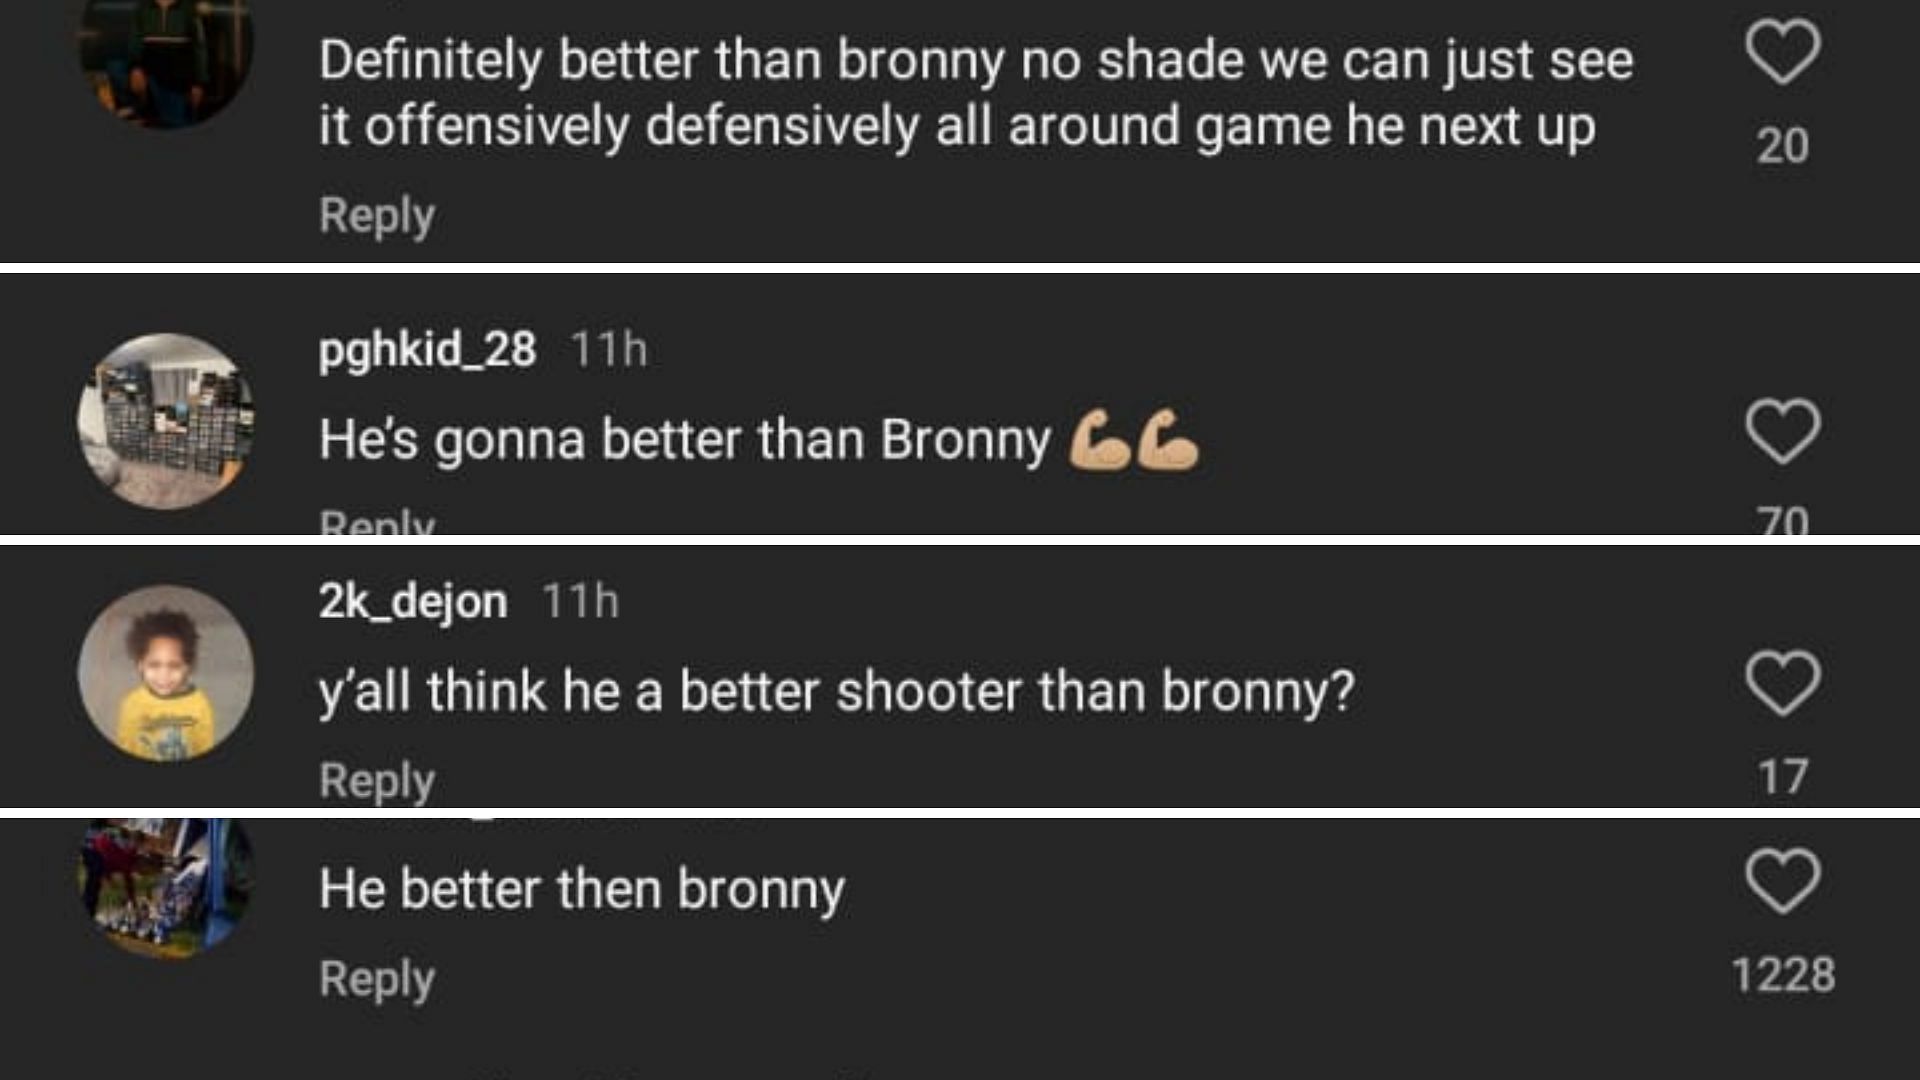 Bryce is better than Bronny, many argued